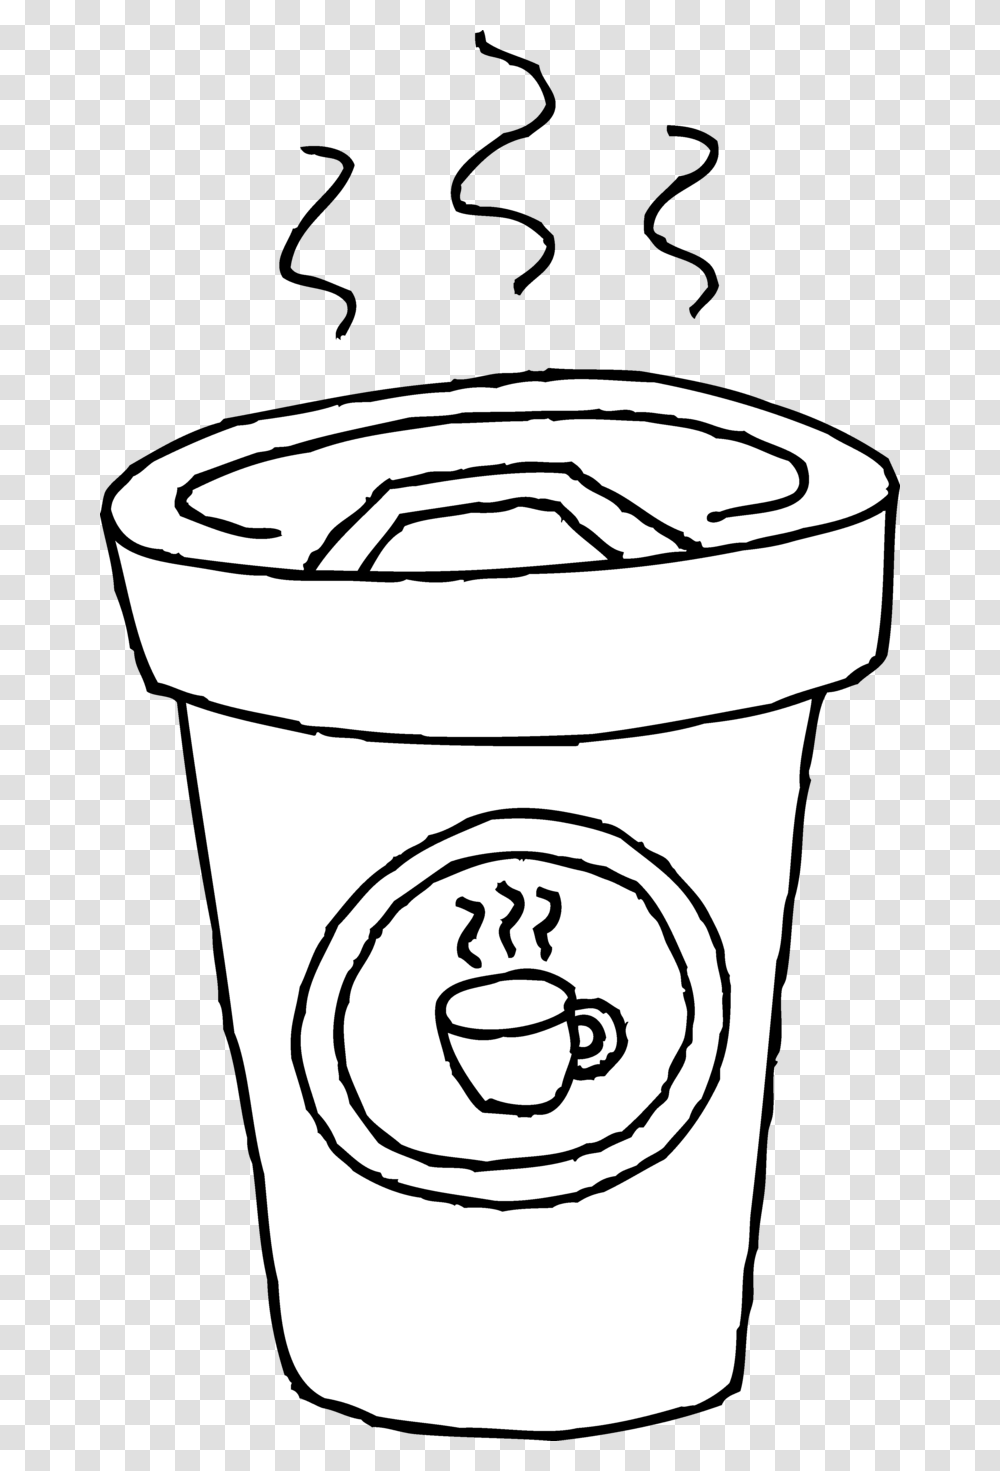 Tea Coffee Cafe Starbucks Cup Hq Coffee Cup Colouring Page, Bucket Transparent Png